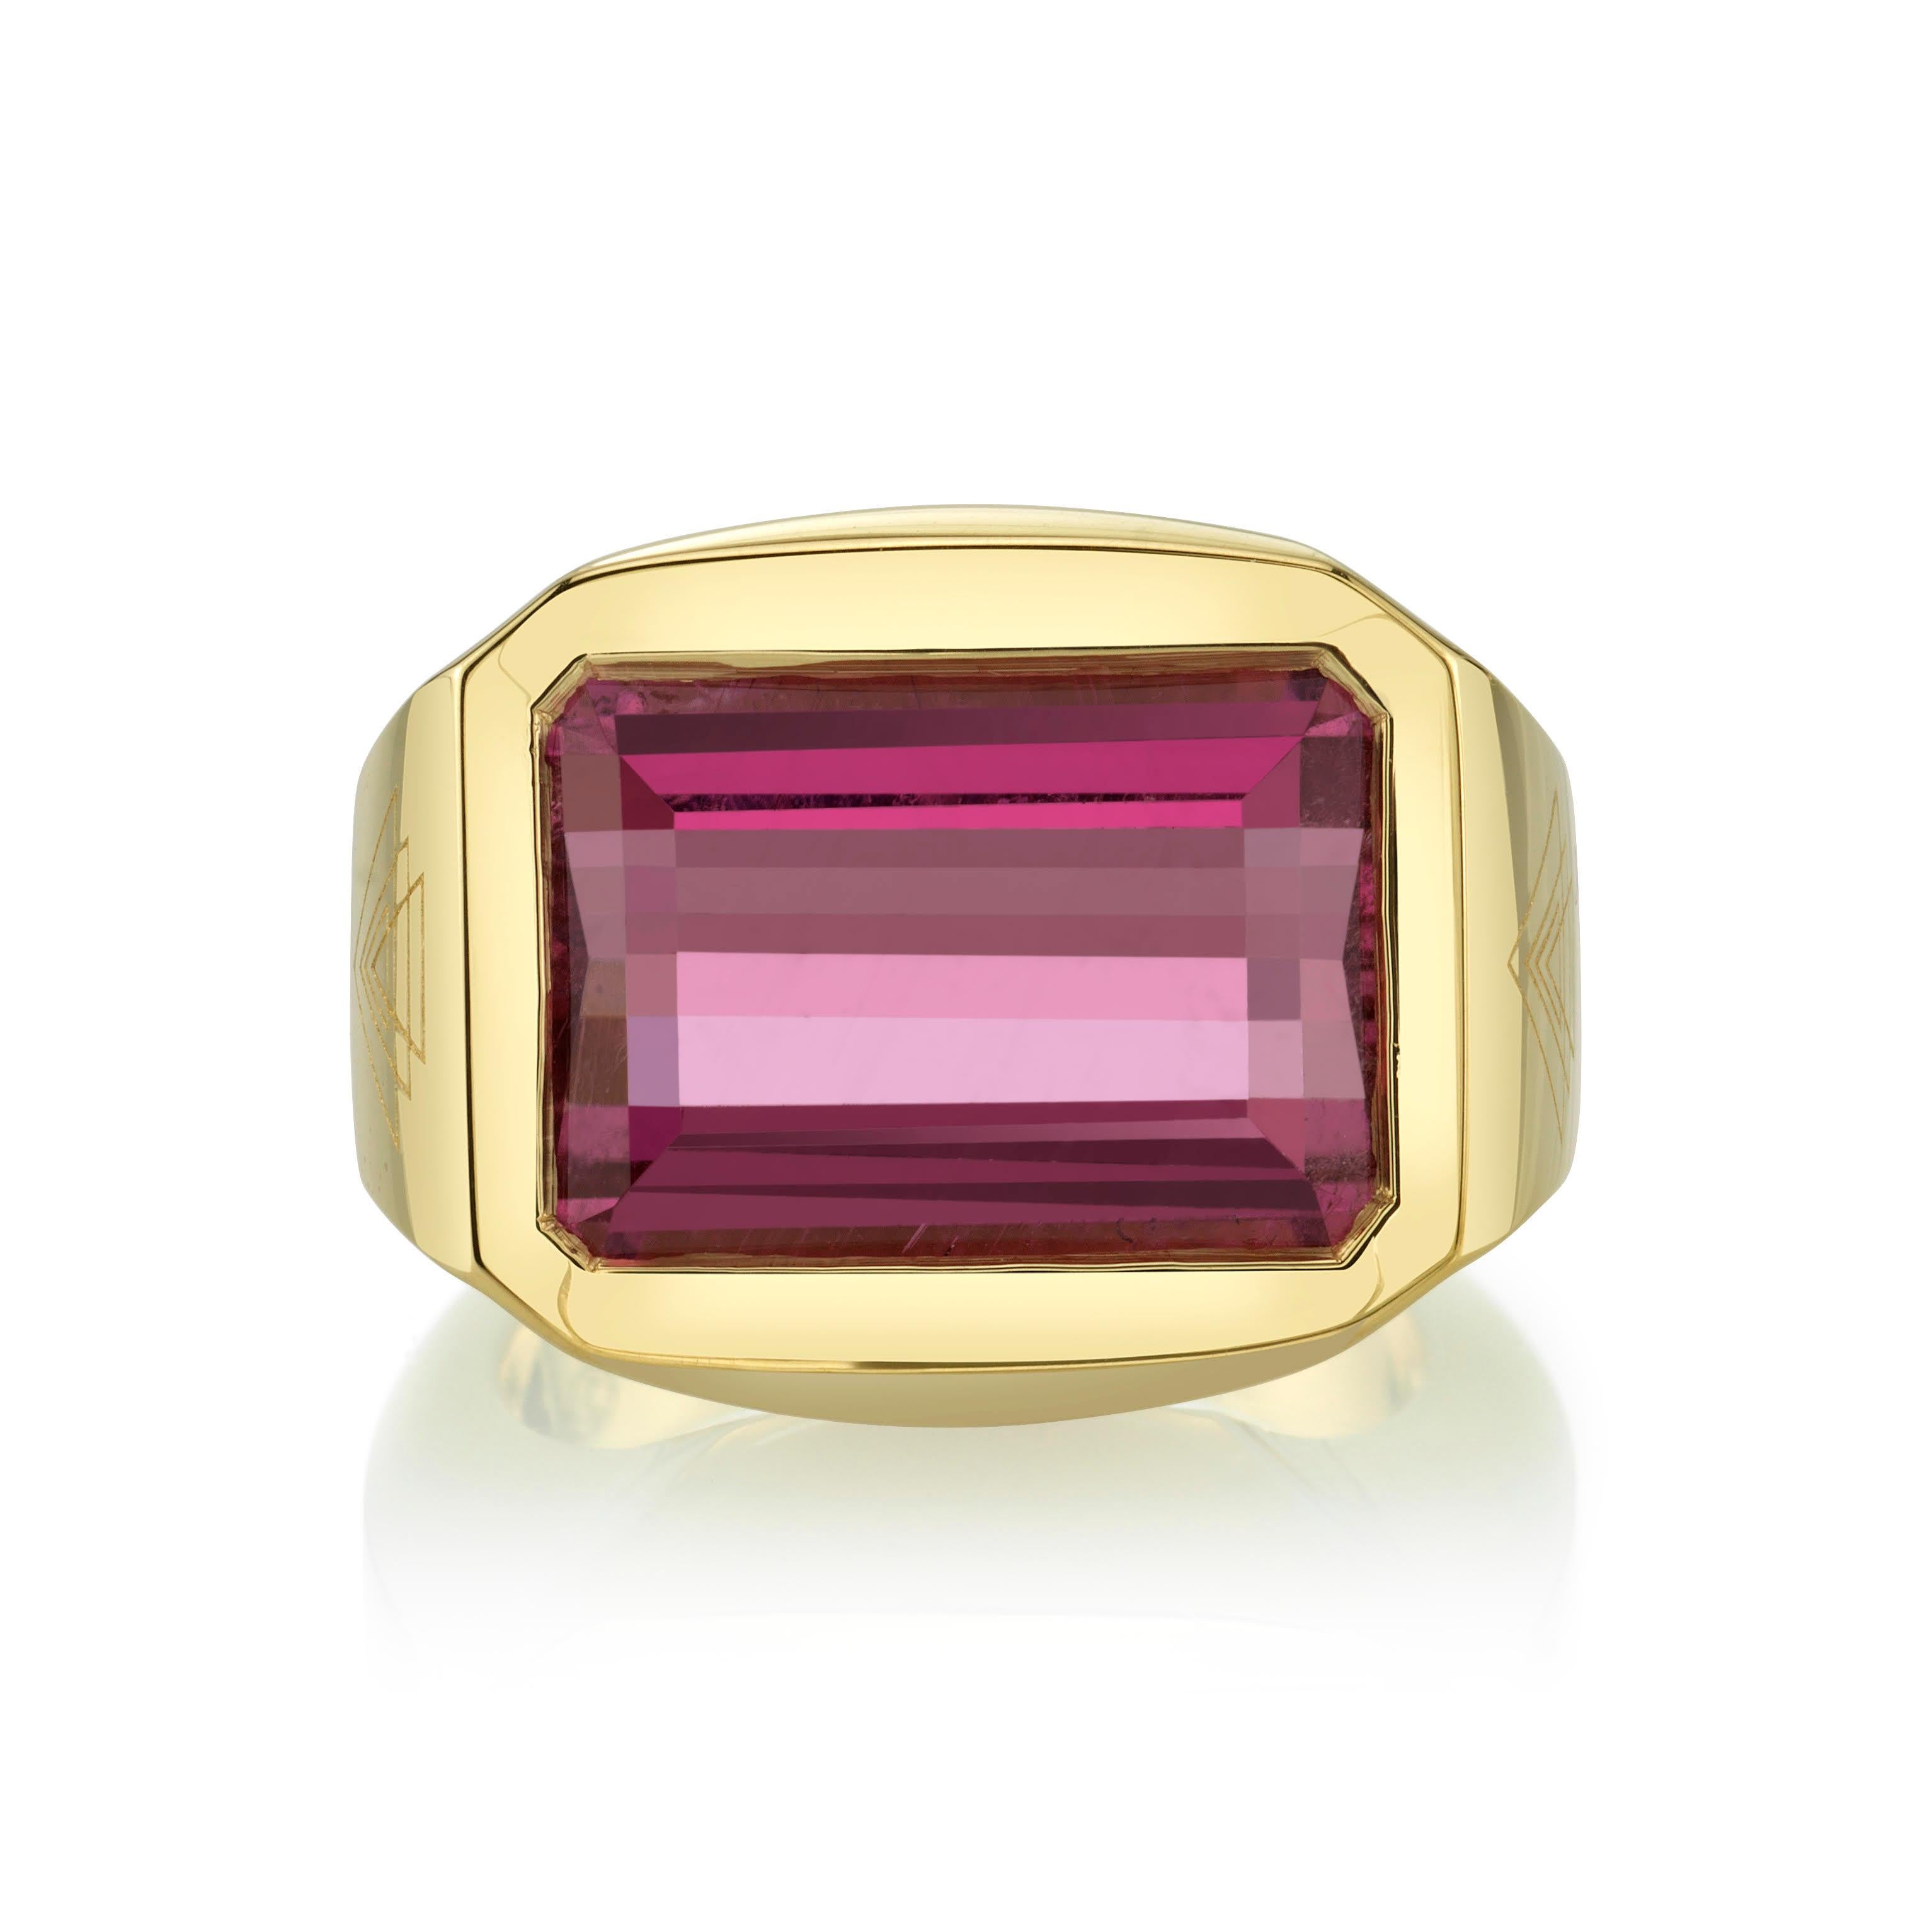 This Ring is handcrafted in 18-karat yellow gold with an emerald-cut Pink Tourmaline that is 5.4 Carats.
This Ring is one-of-a-kind and is a size 3.5. 
This Ring has meaningful engravings on the sides. One side of this Ring ( Triangle pointing down)